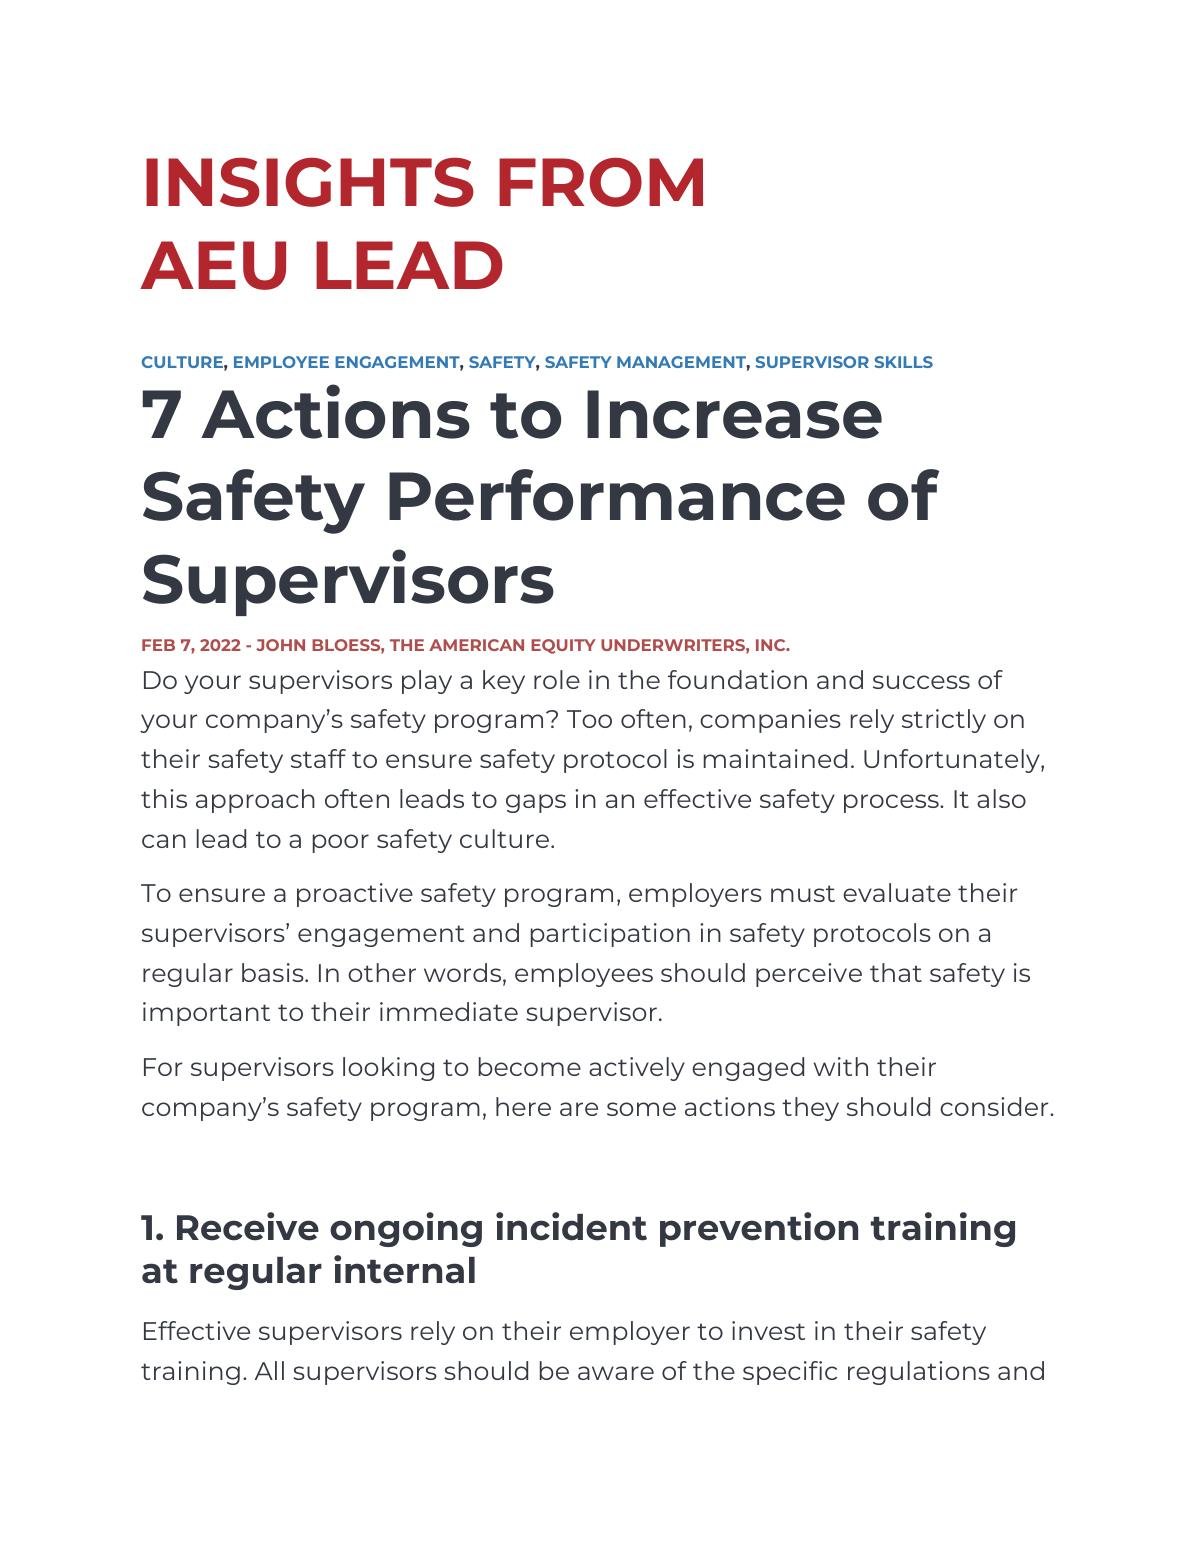 7 Actions to Increase Safety Performance of Supervisors